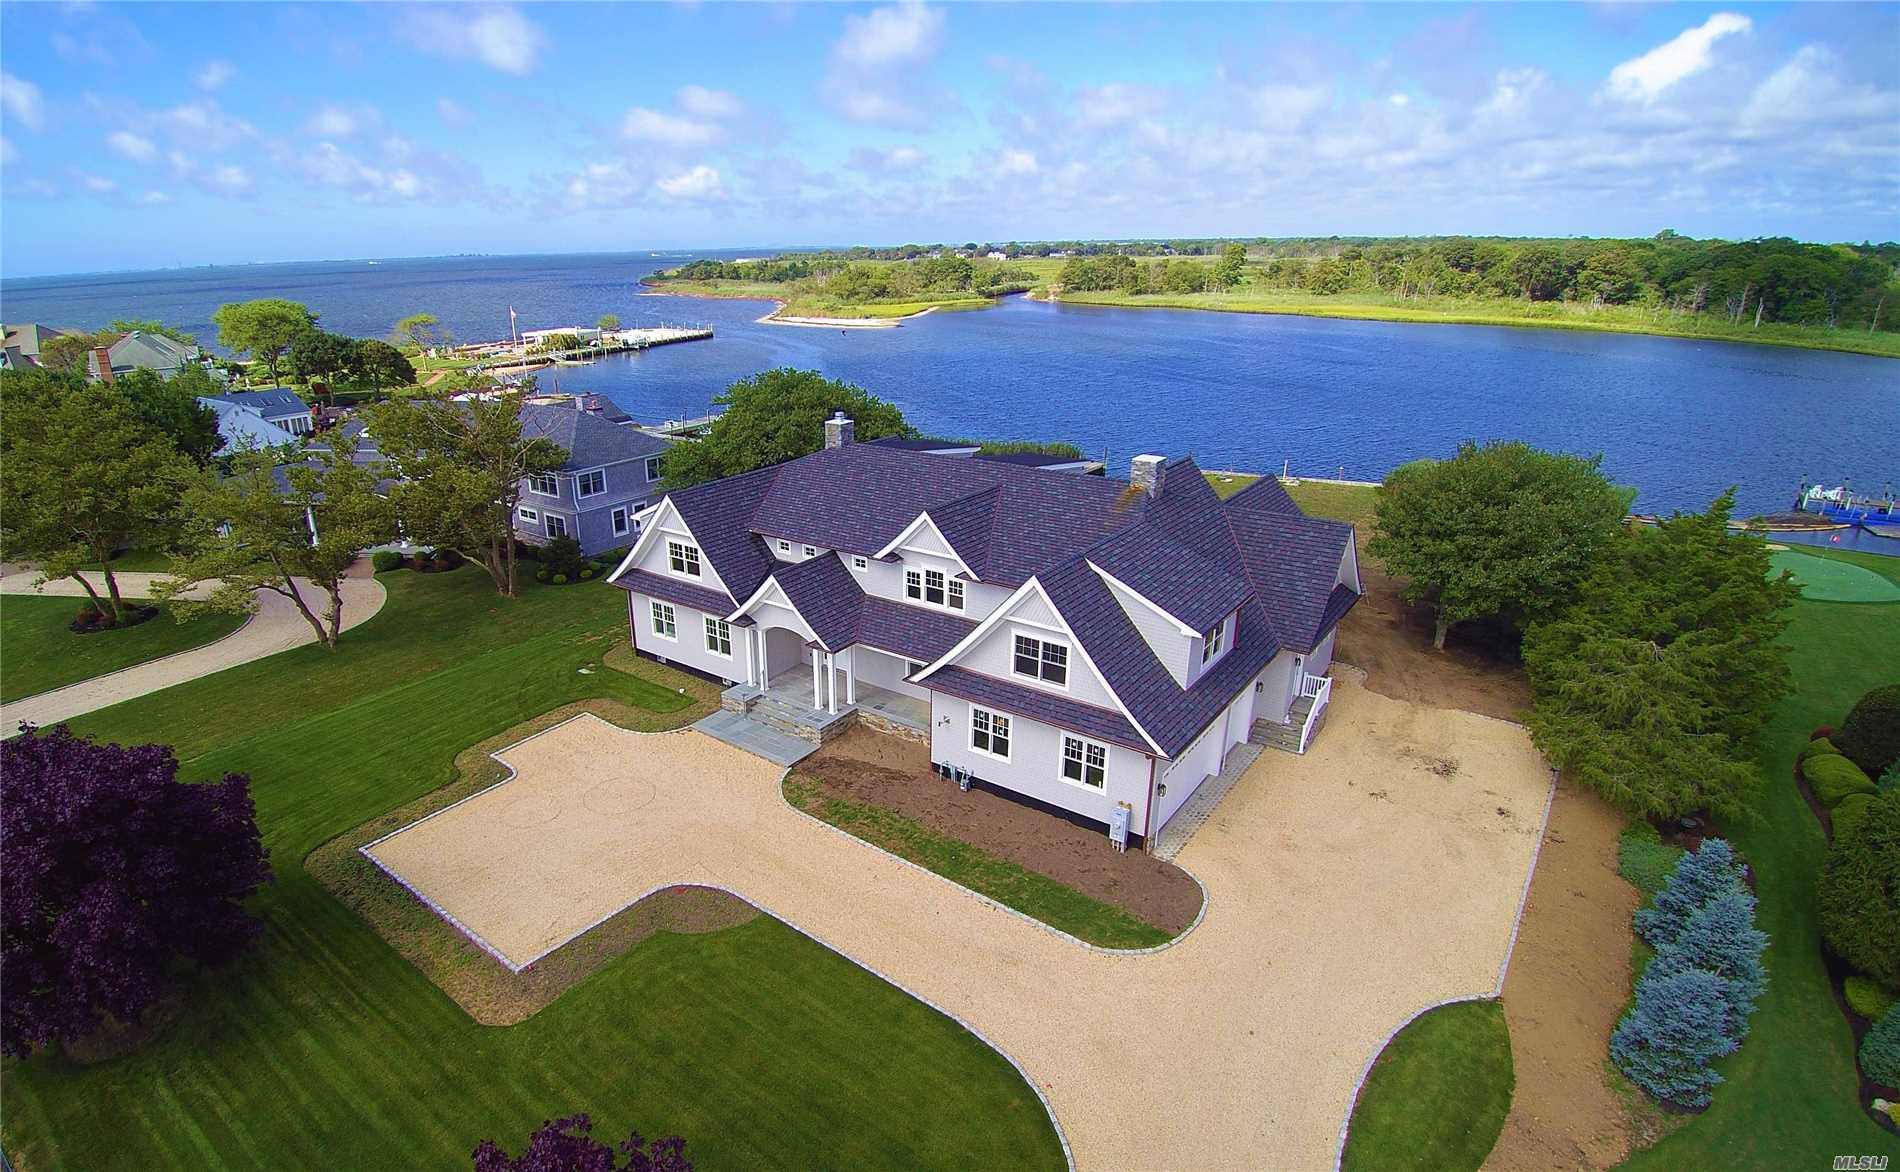 2018 Hampton's Style Cedar Colonial On Champlin Creek In The Moorings. This 4600-6100 Sqft Mansion Is One Of Eight Properties With Protected Water For Your Yacht And Bay Views. 1 Acre Of Serine Privacy And Stunning Sunset Views Of The Nature Preserve Across The Way. Hi End Build All The Bell And Whistles Including 5/4 Kitchen Cabinetry And Amazing Mill Work Thru-Out.3 Car Gar, Full Basement. Elevation Elevation Elevation! Location Location Location!